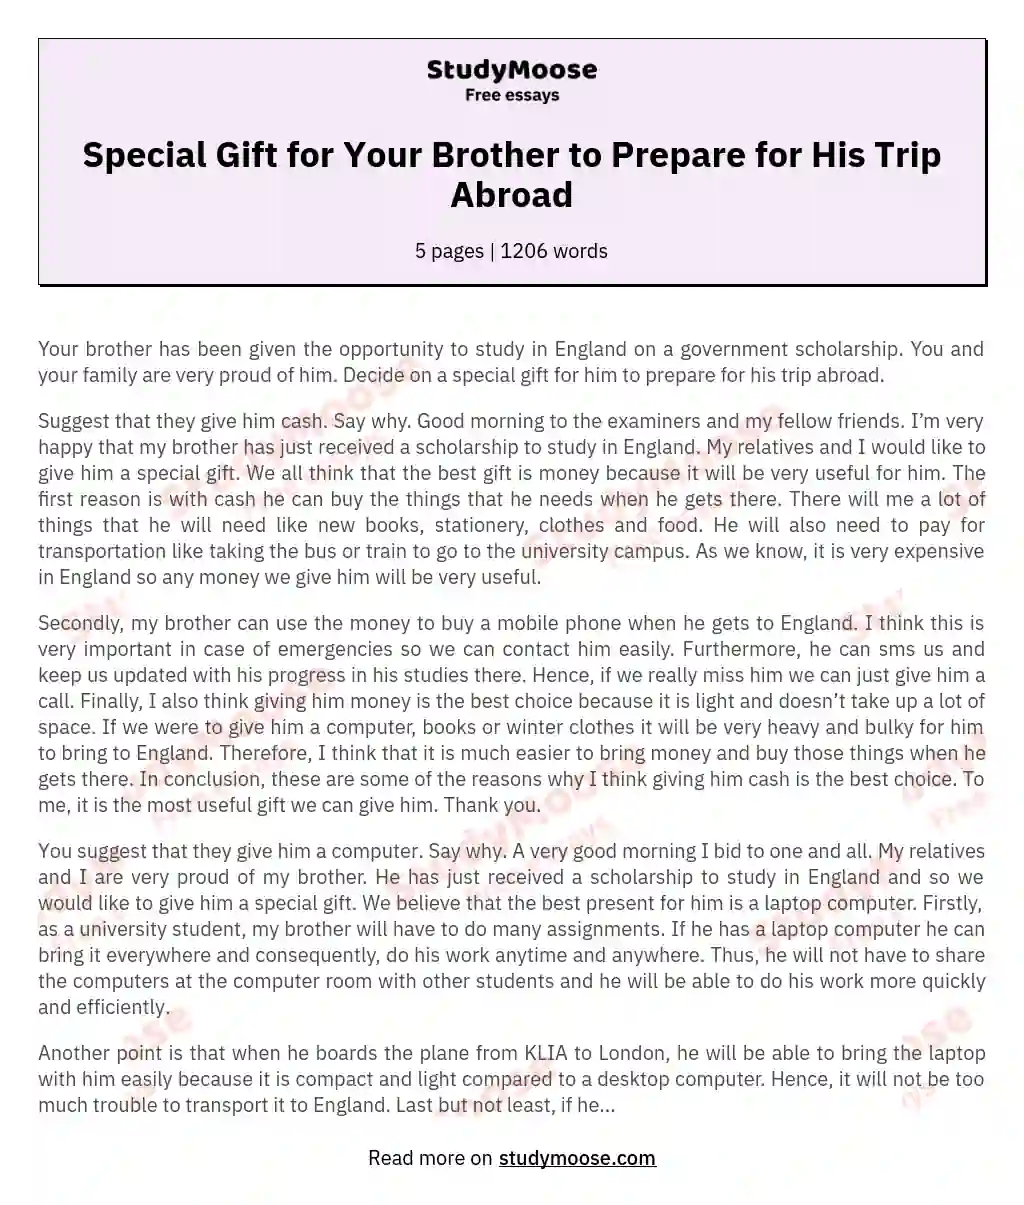 Special Gift for Your Brother to Prepare for His Trip Abroad